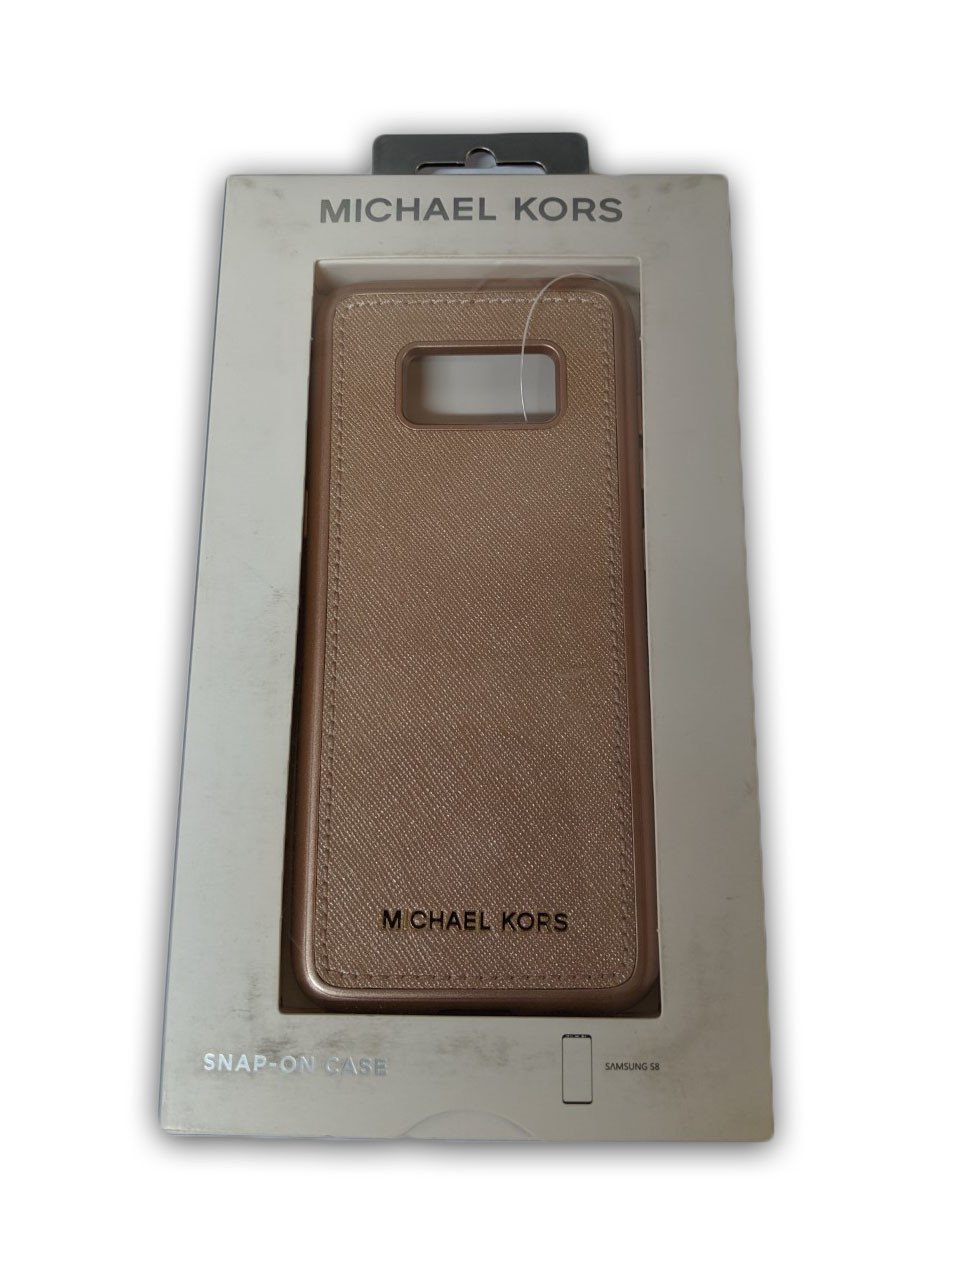 Original Michael Kors Saffiano Leather Snap-on Case for Galaxy S8 - Rose  Gold - Unlimited Cellular